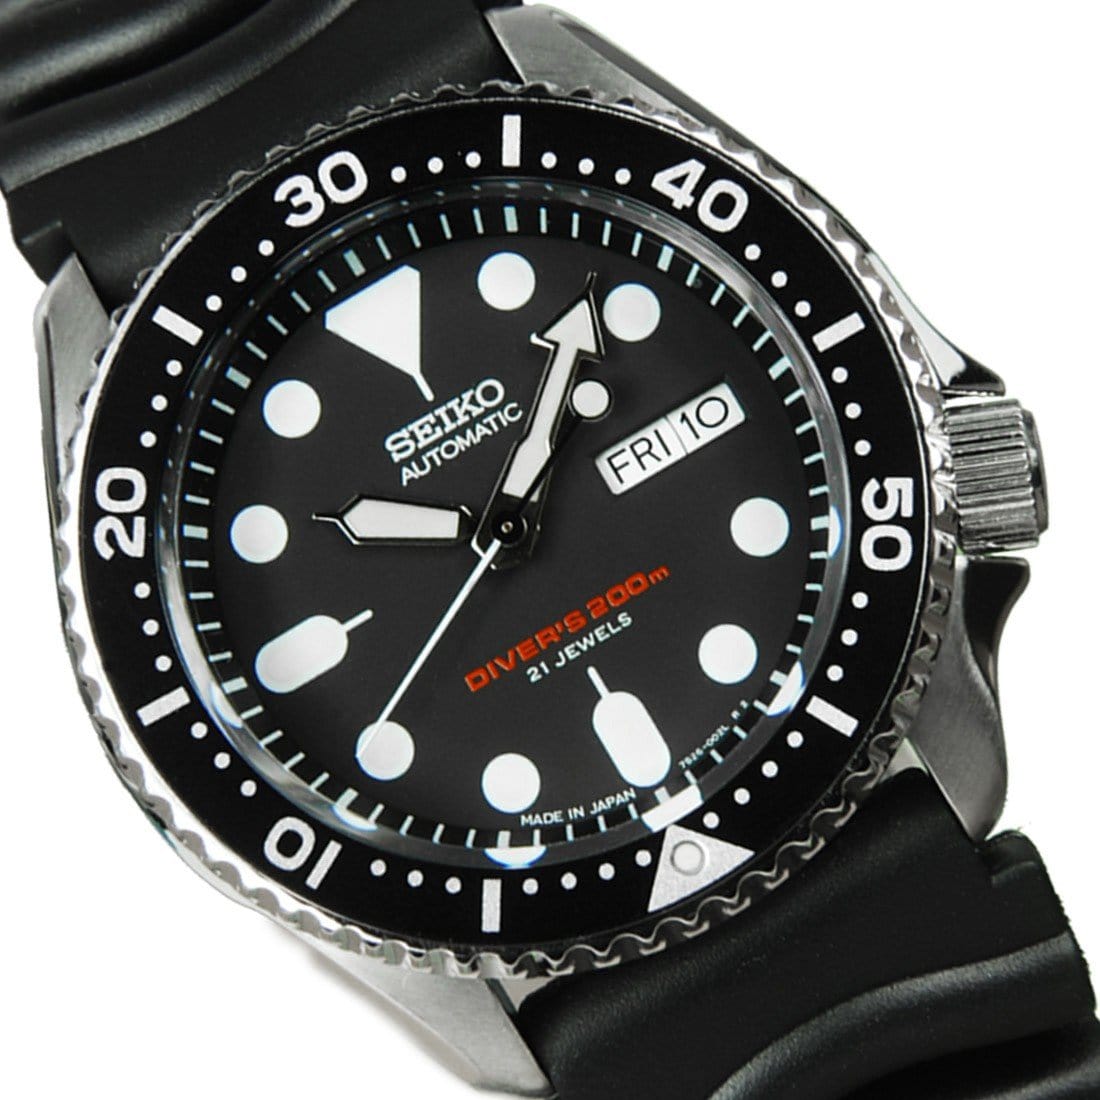 Seiko Divers Watch SKX007 SKX007J1 with Additional Stainless Mesh Strap